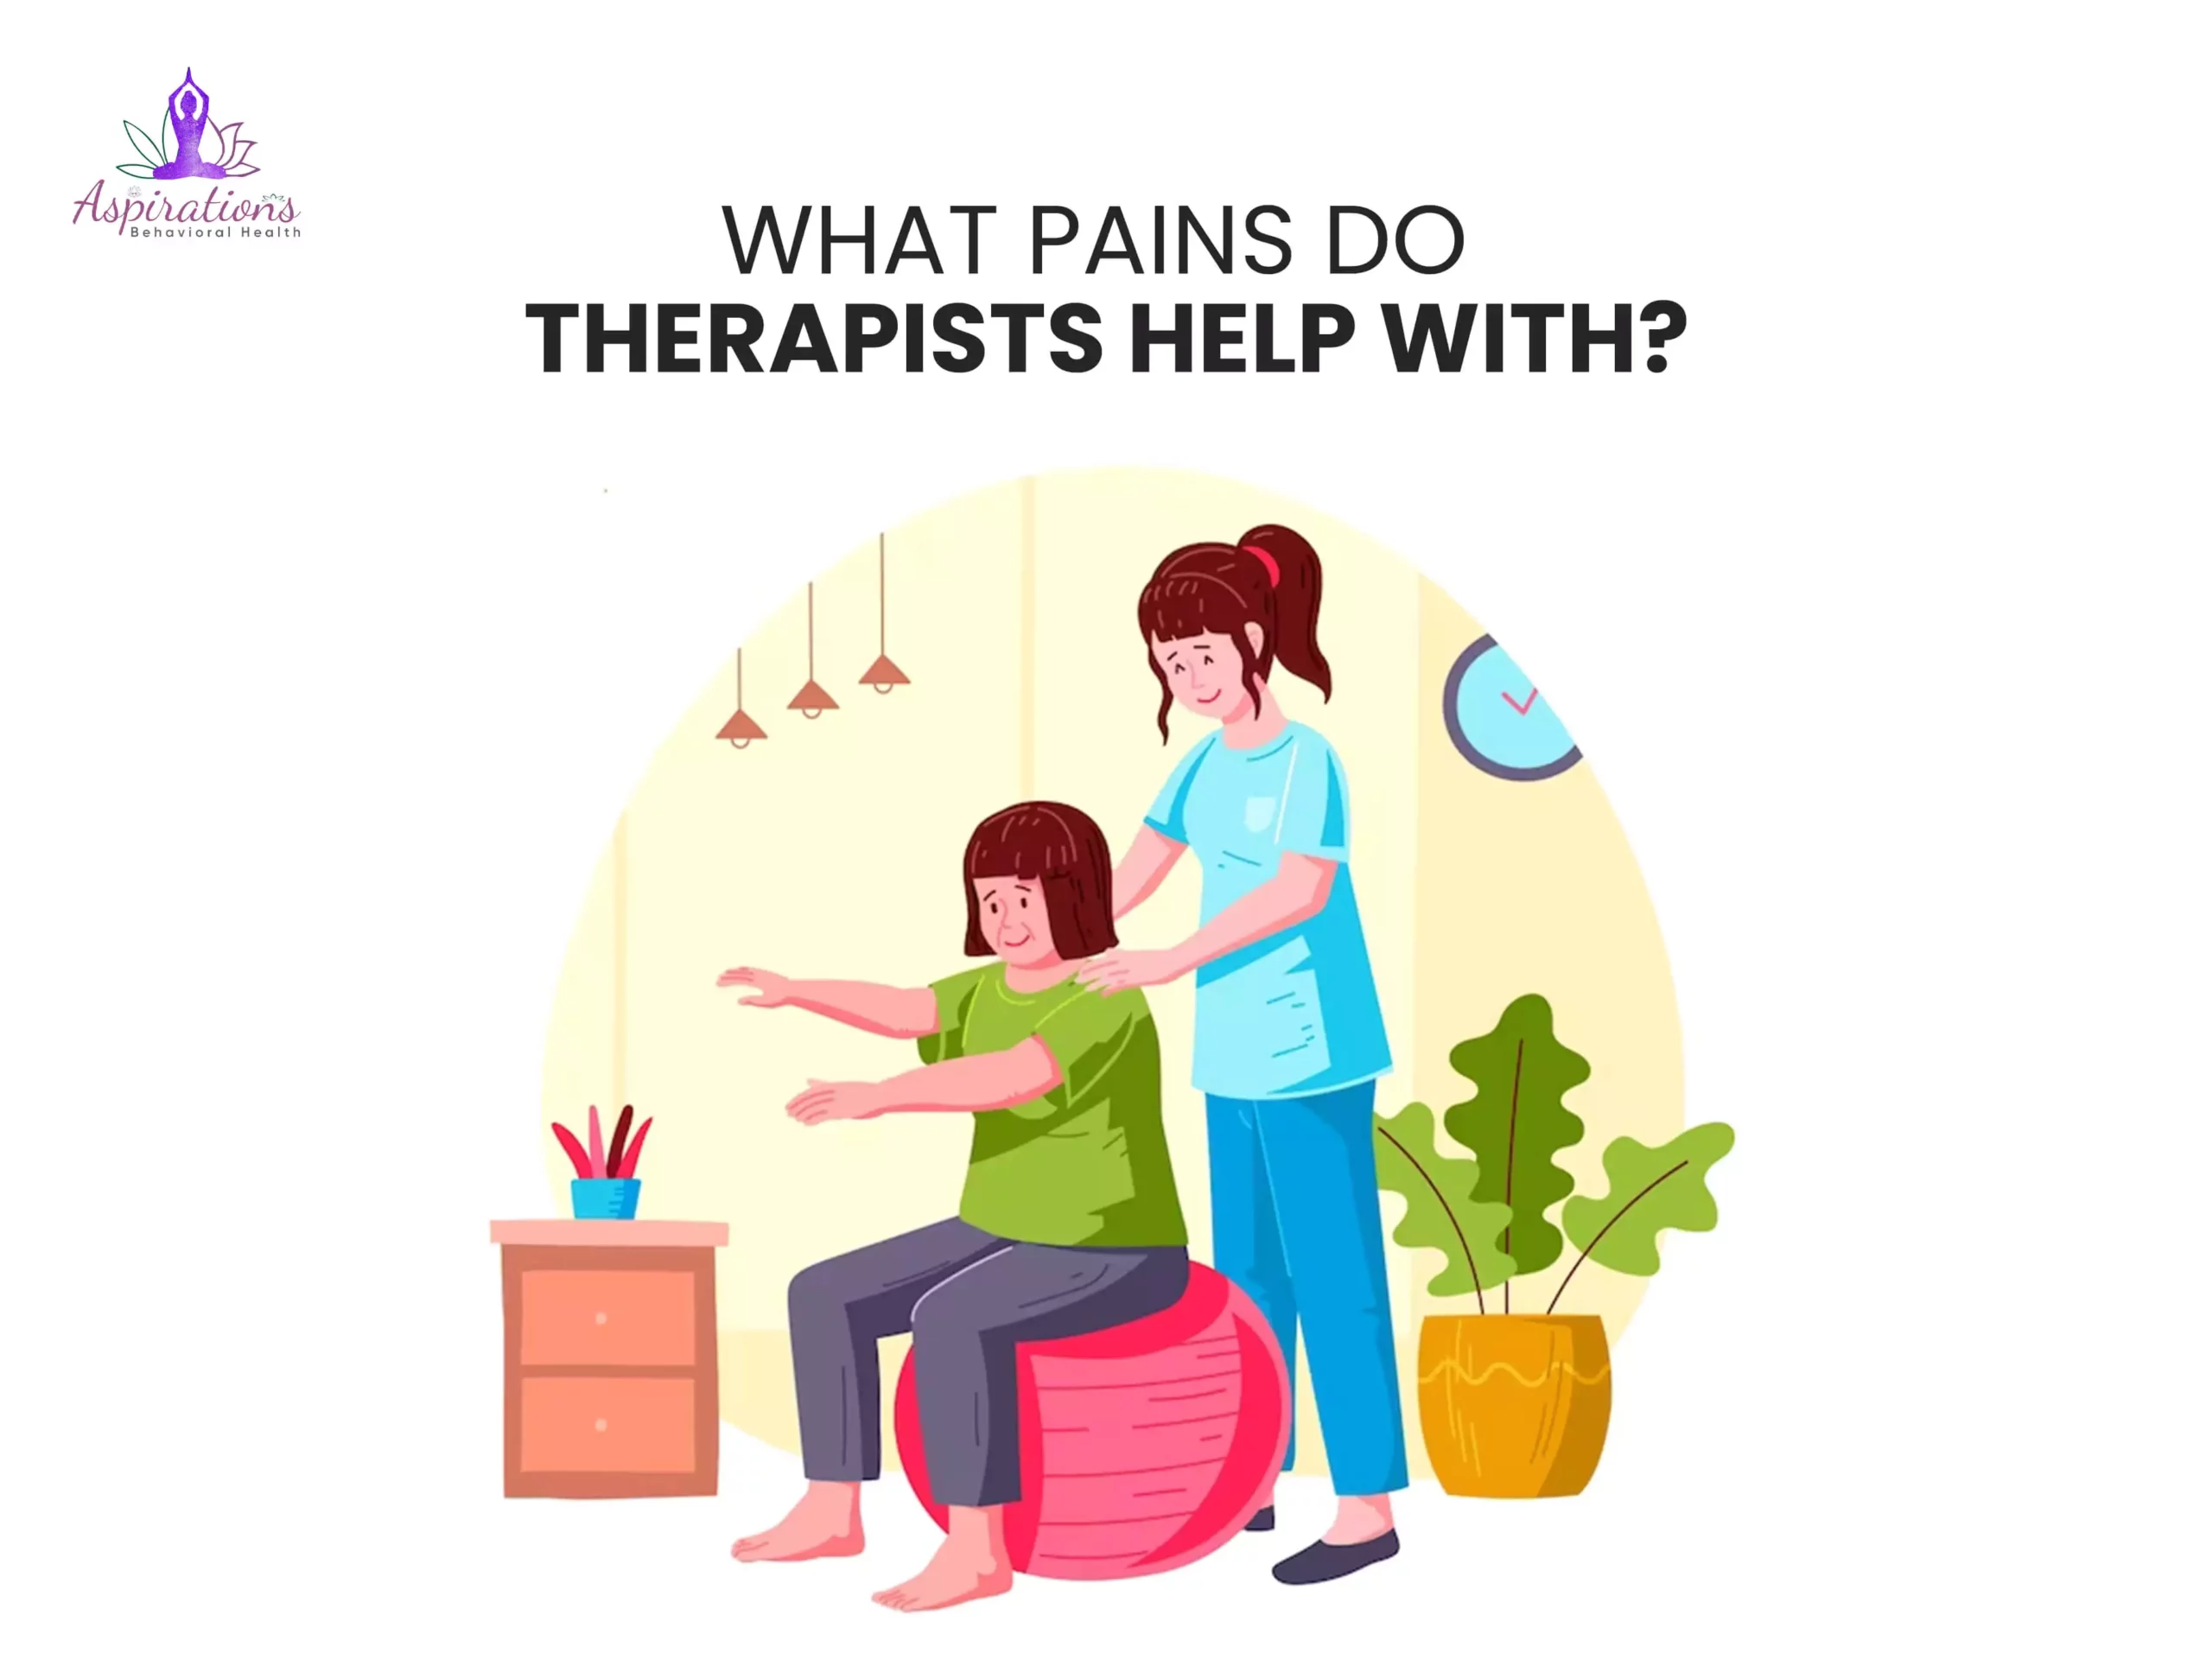 What Pains Do Therapists Help With?